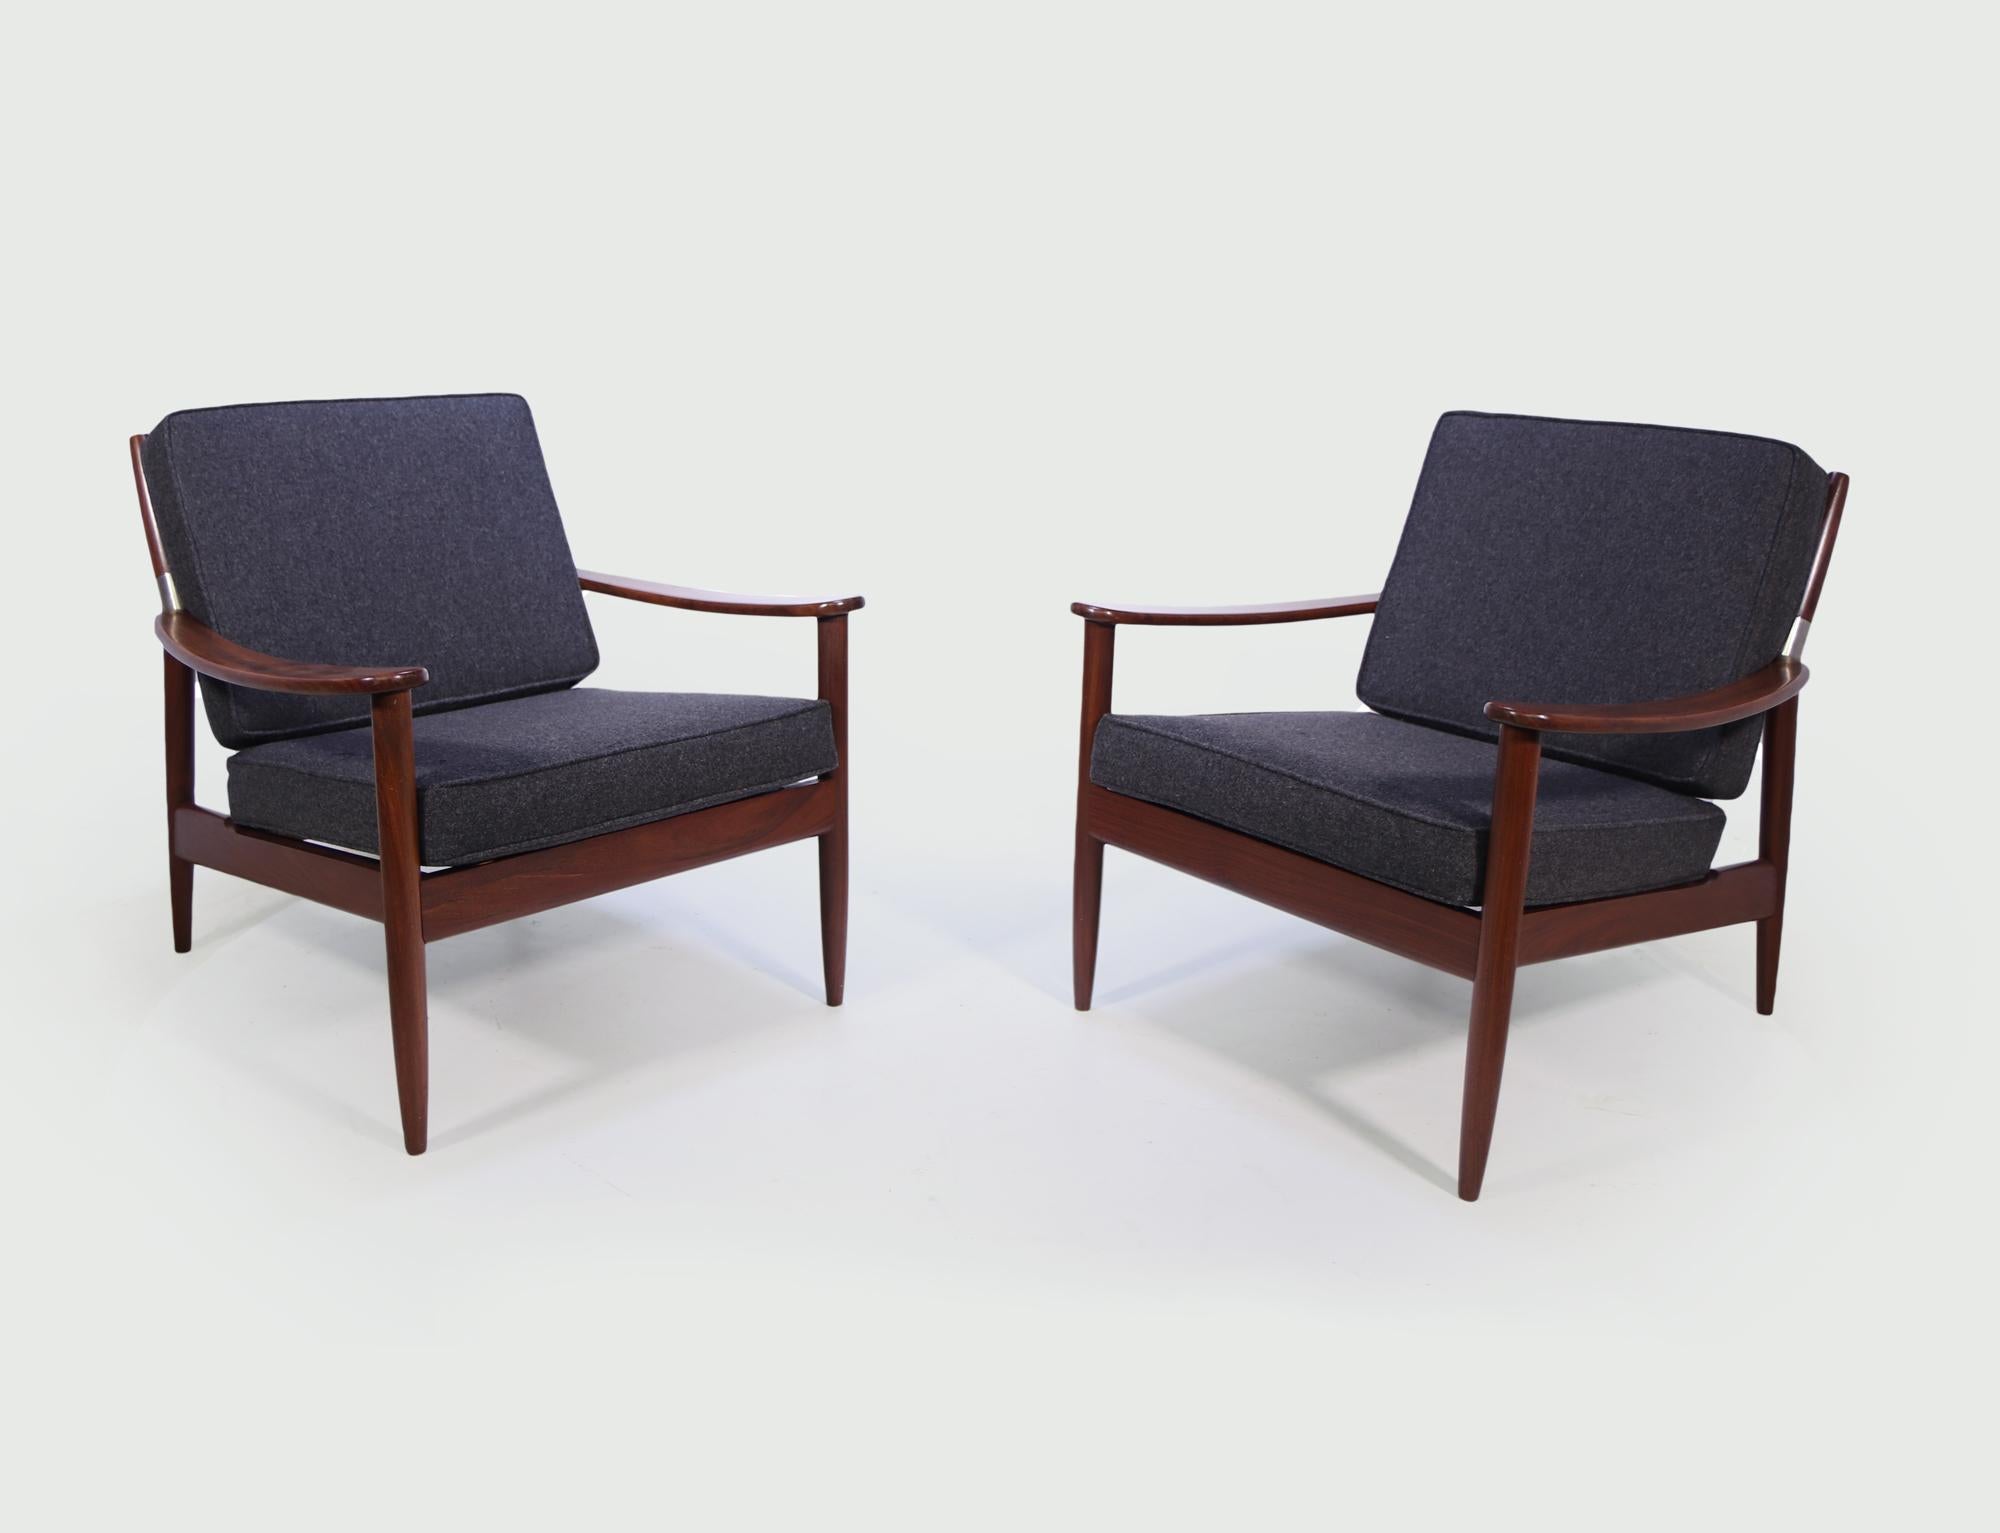 A pair of Danish mid century chairs in solid teak with a polished metal joint where the arm and backrest meet, the frames are good and solid and have had new cushions that have been covered in wool felt fabric in charcoal grey

Age: 1960

Style: